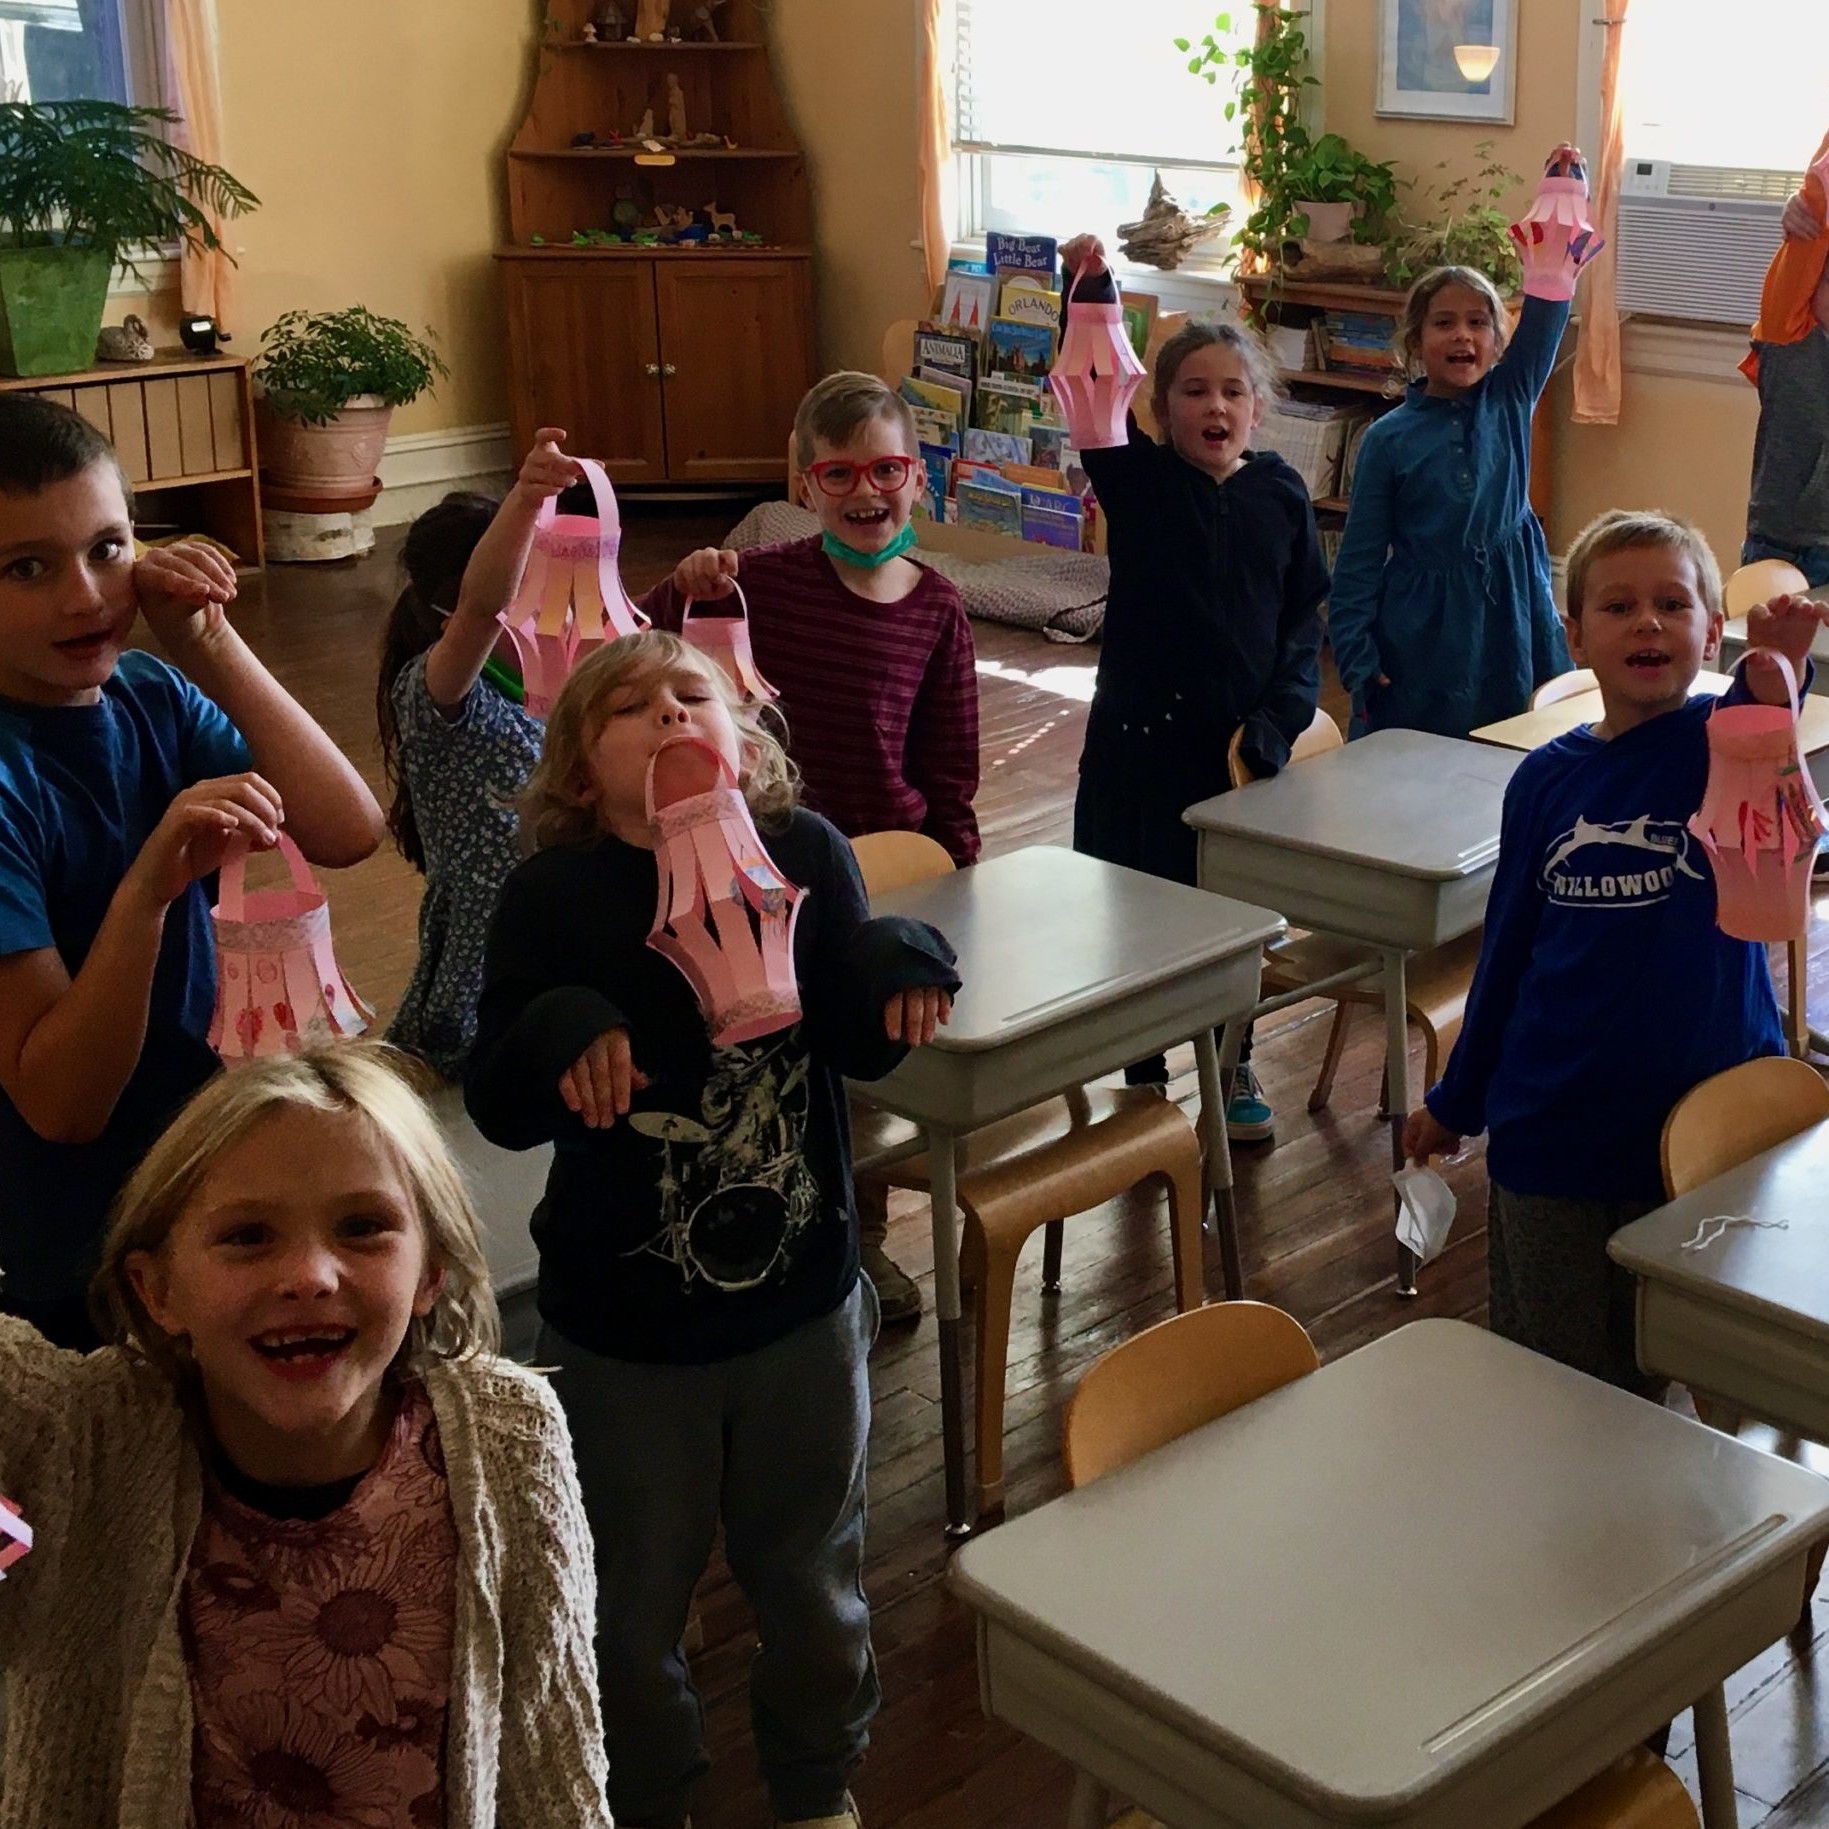 Where What When - A Glimpse into Waldorf Education, Part 2